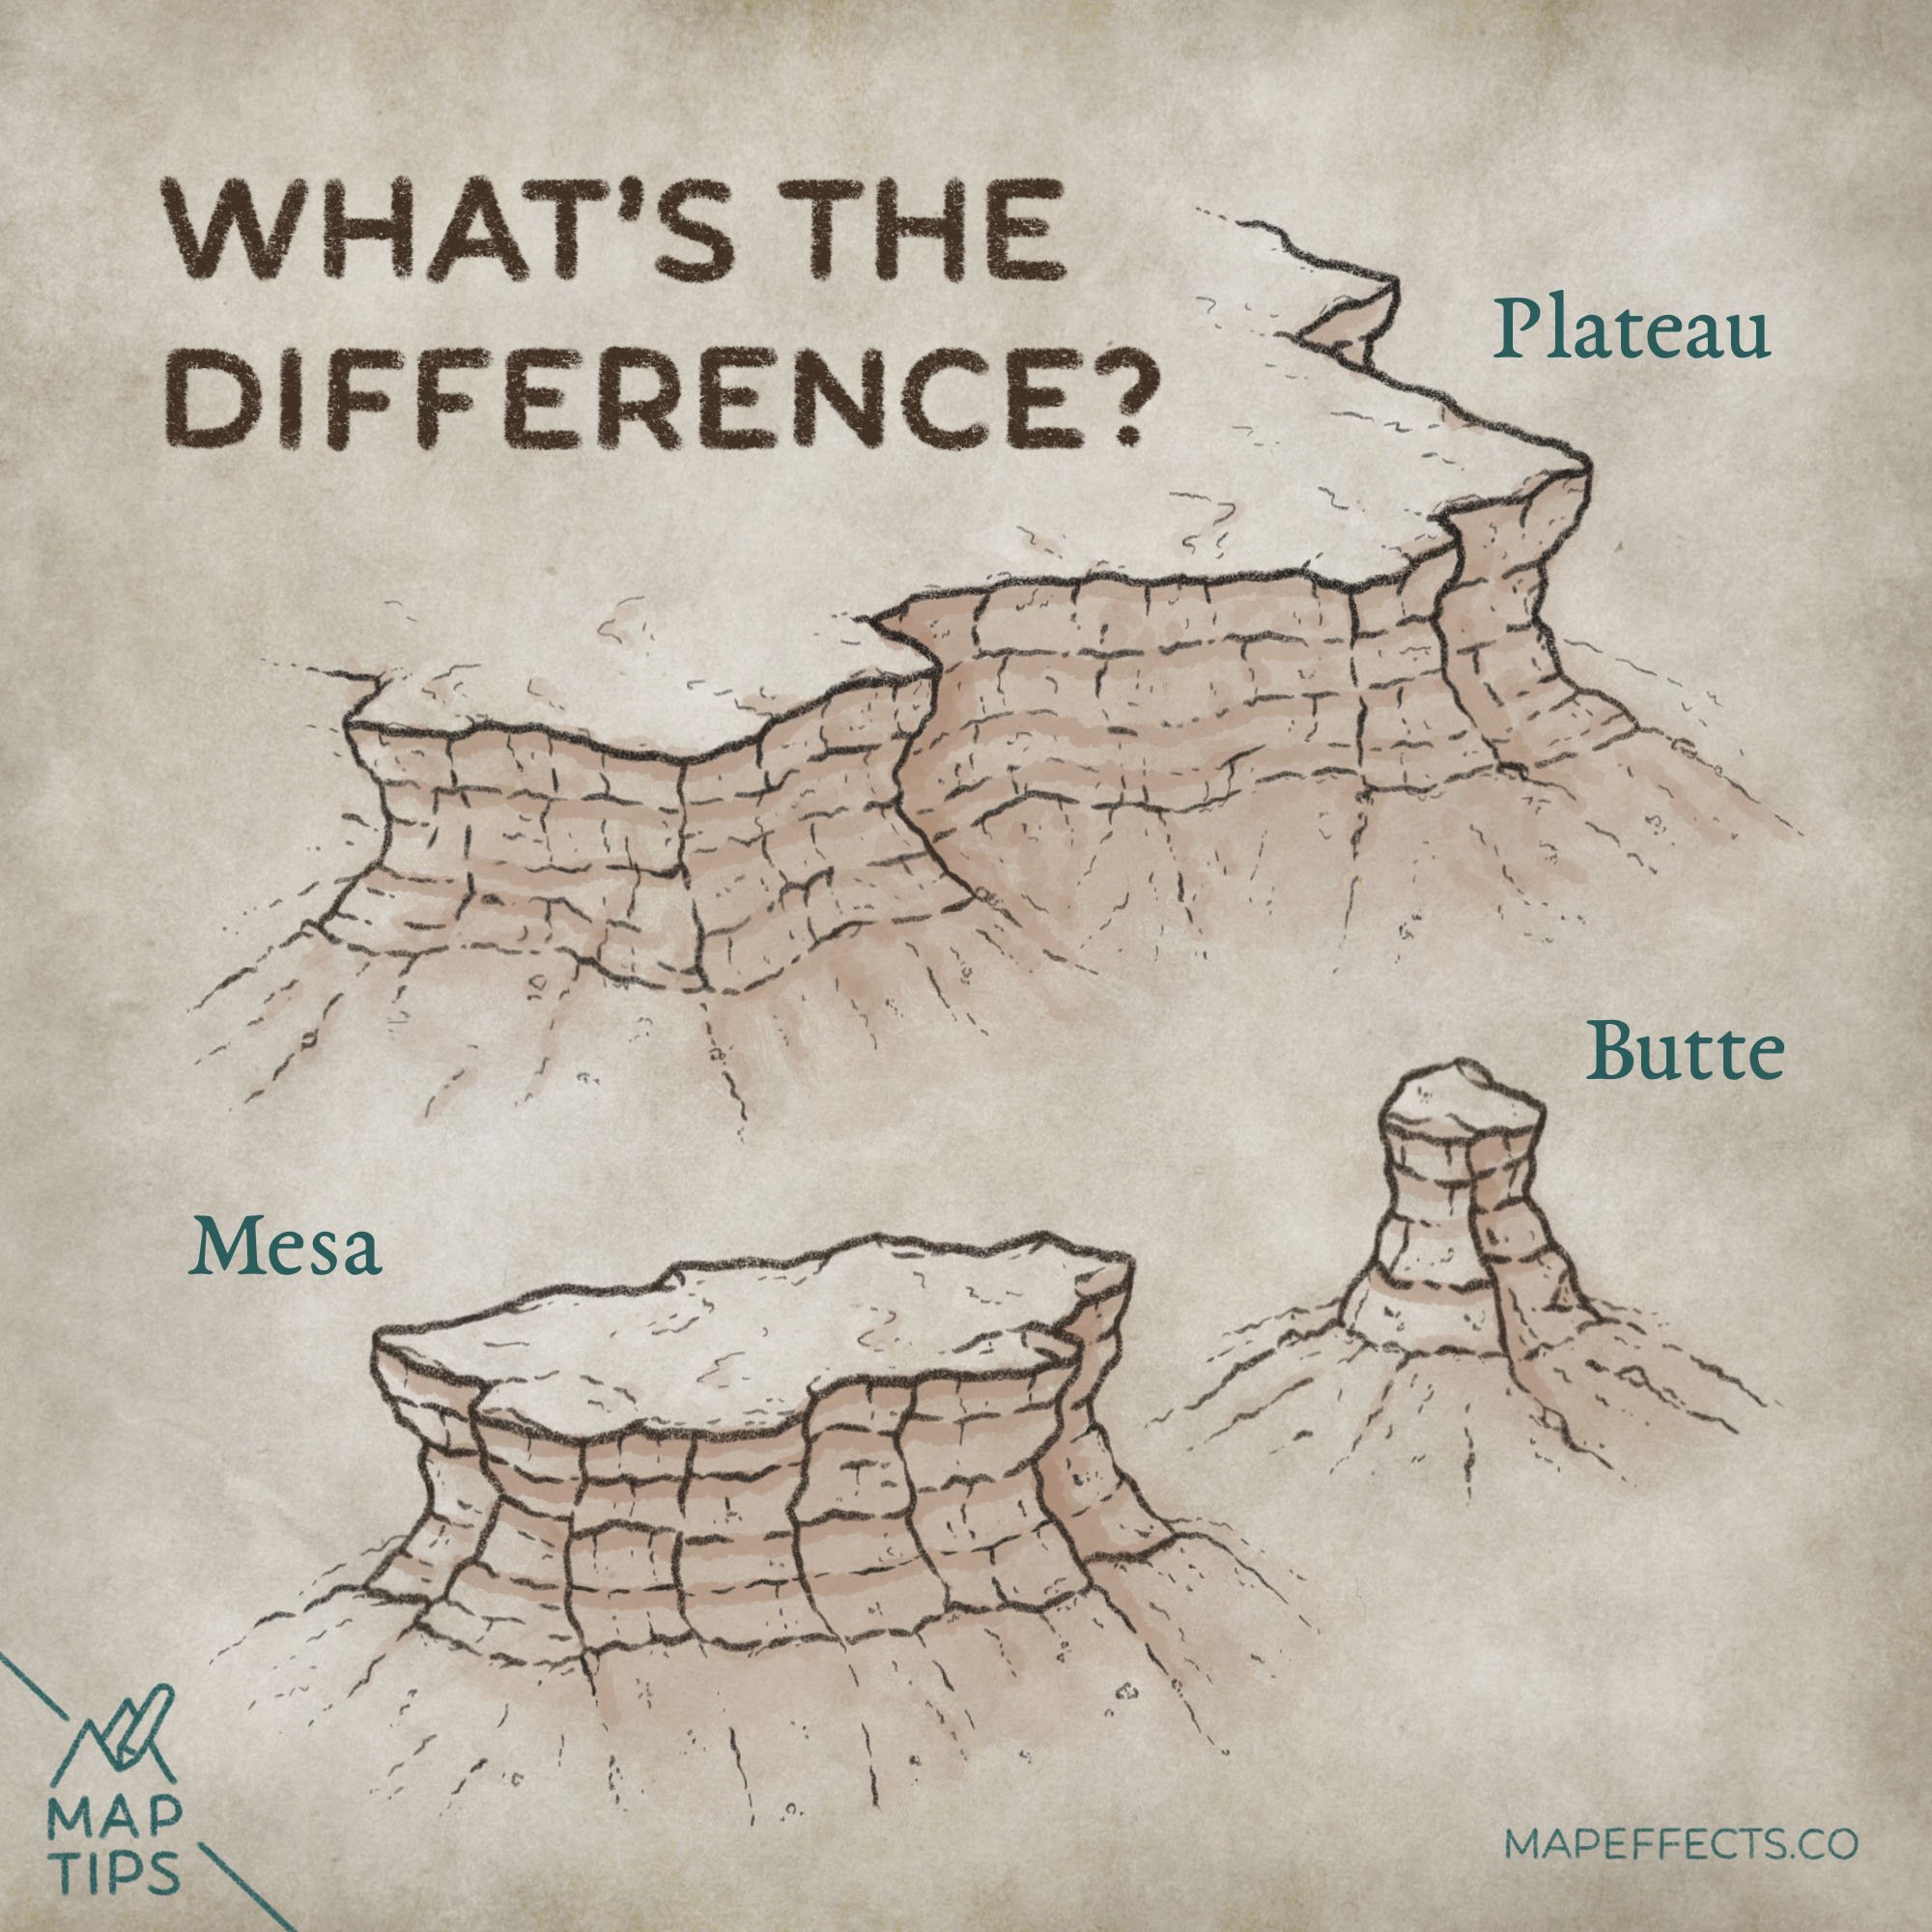 Plateau Formation & Types of Plateaus